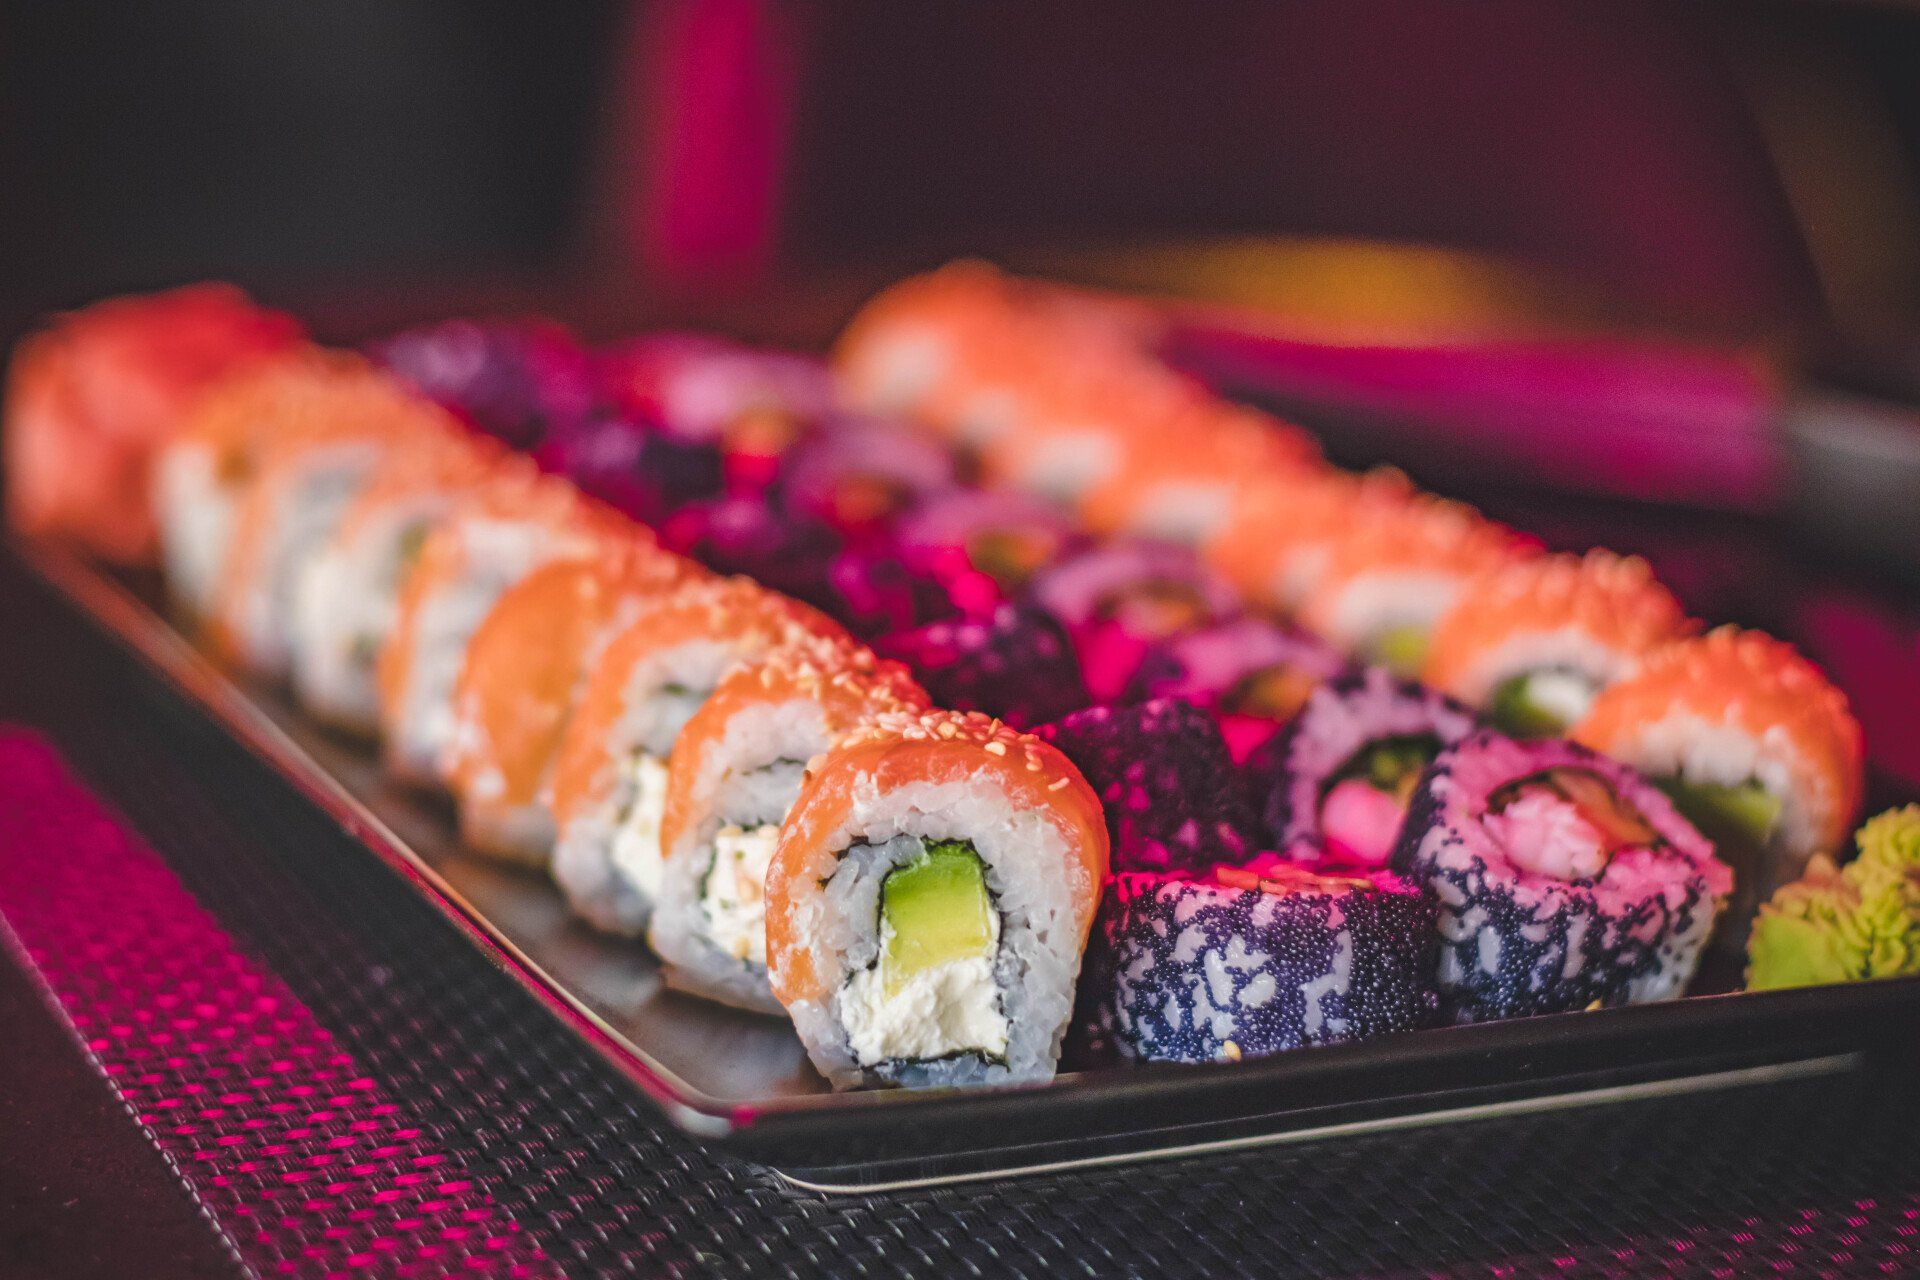 A close up of a plate of sushi on a table.